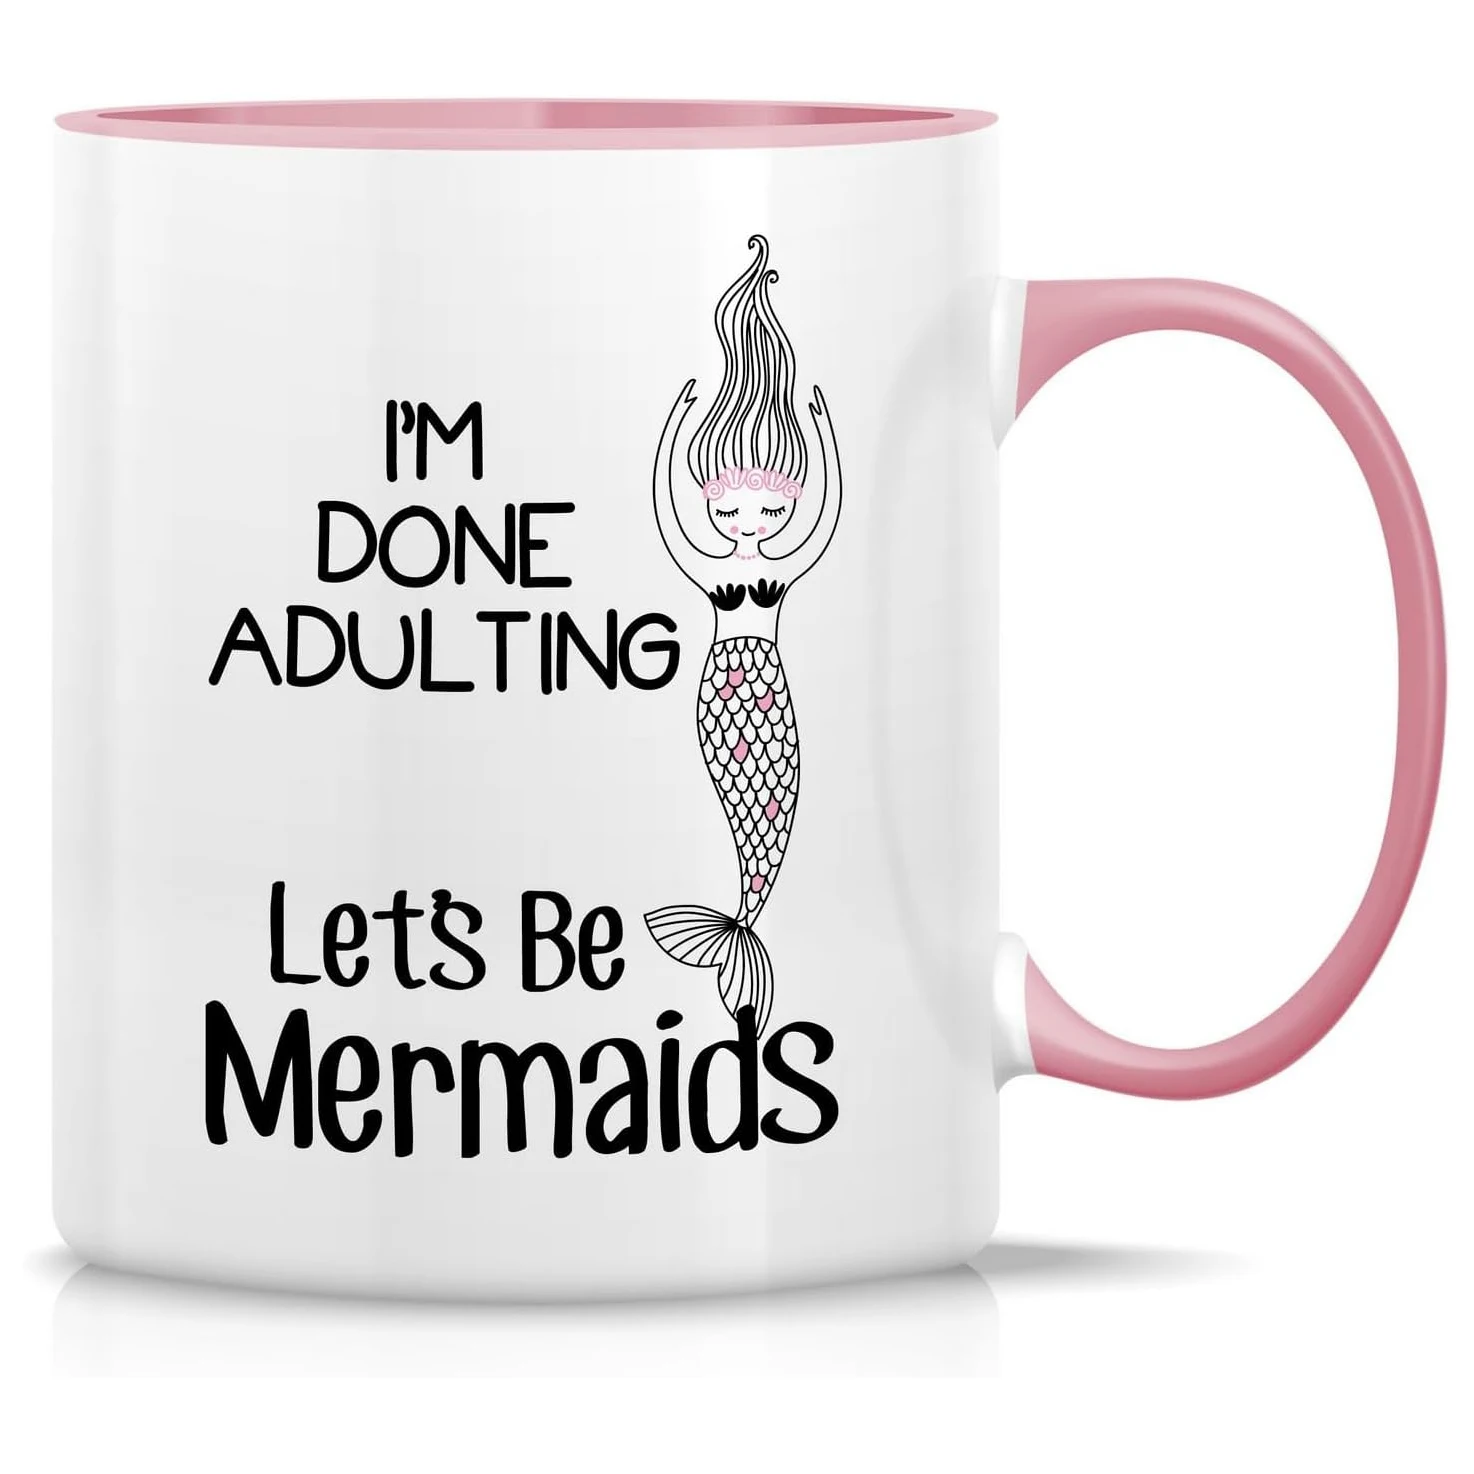 

I'm Done Adulting Let's Be Mermaids 11 Oz Ceramic Coffee Mugs Sarcasm Sarcastic Motivational Inspirational Birthday GiftS